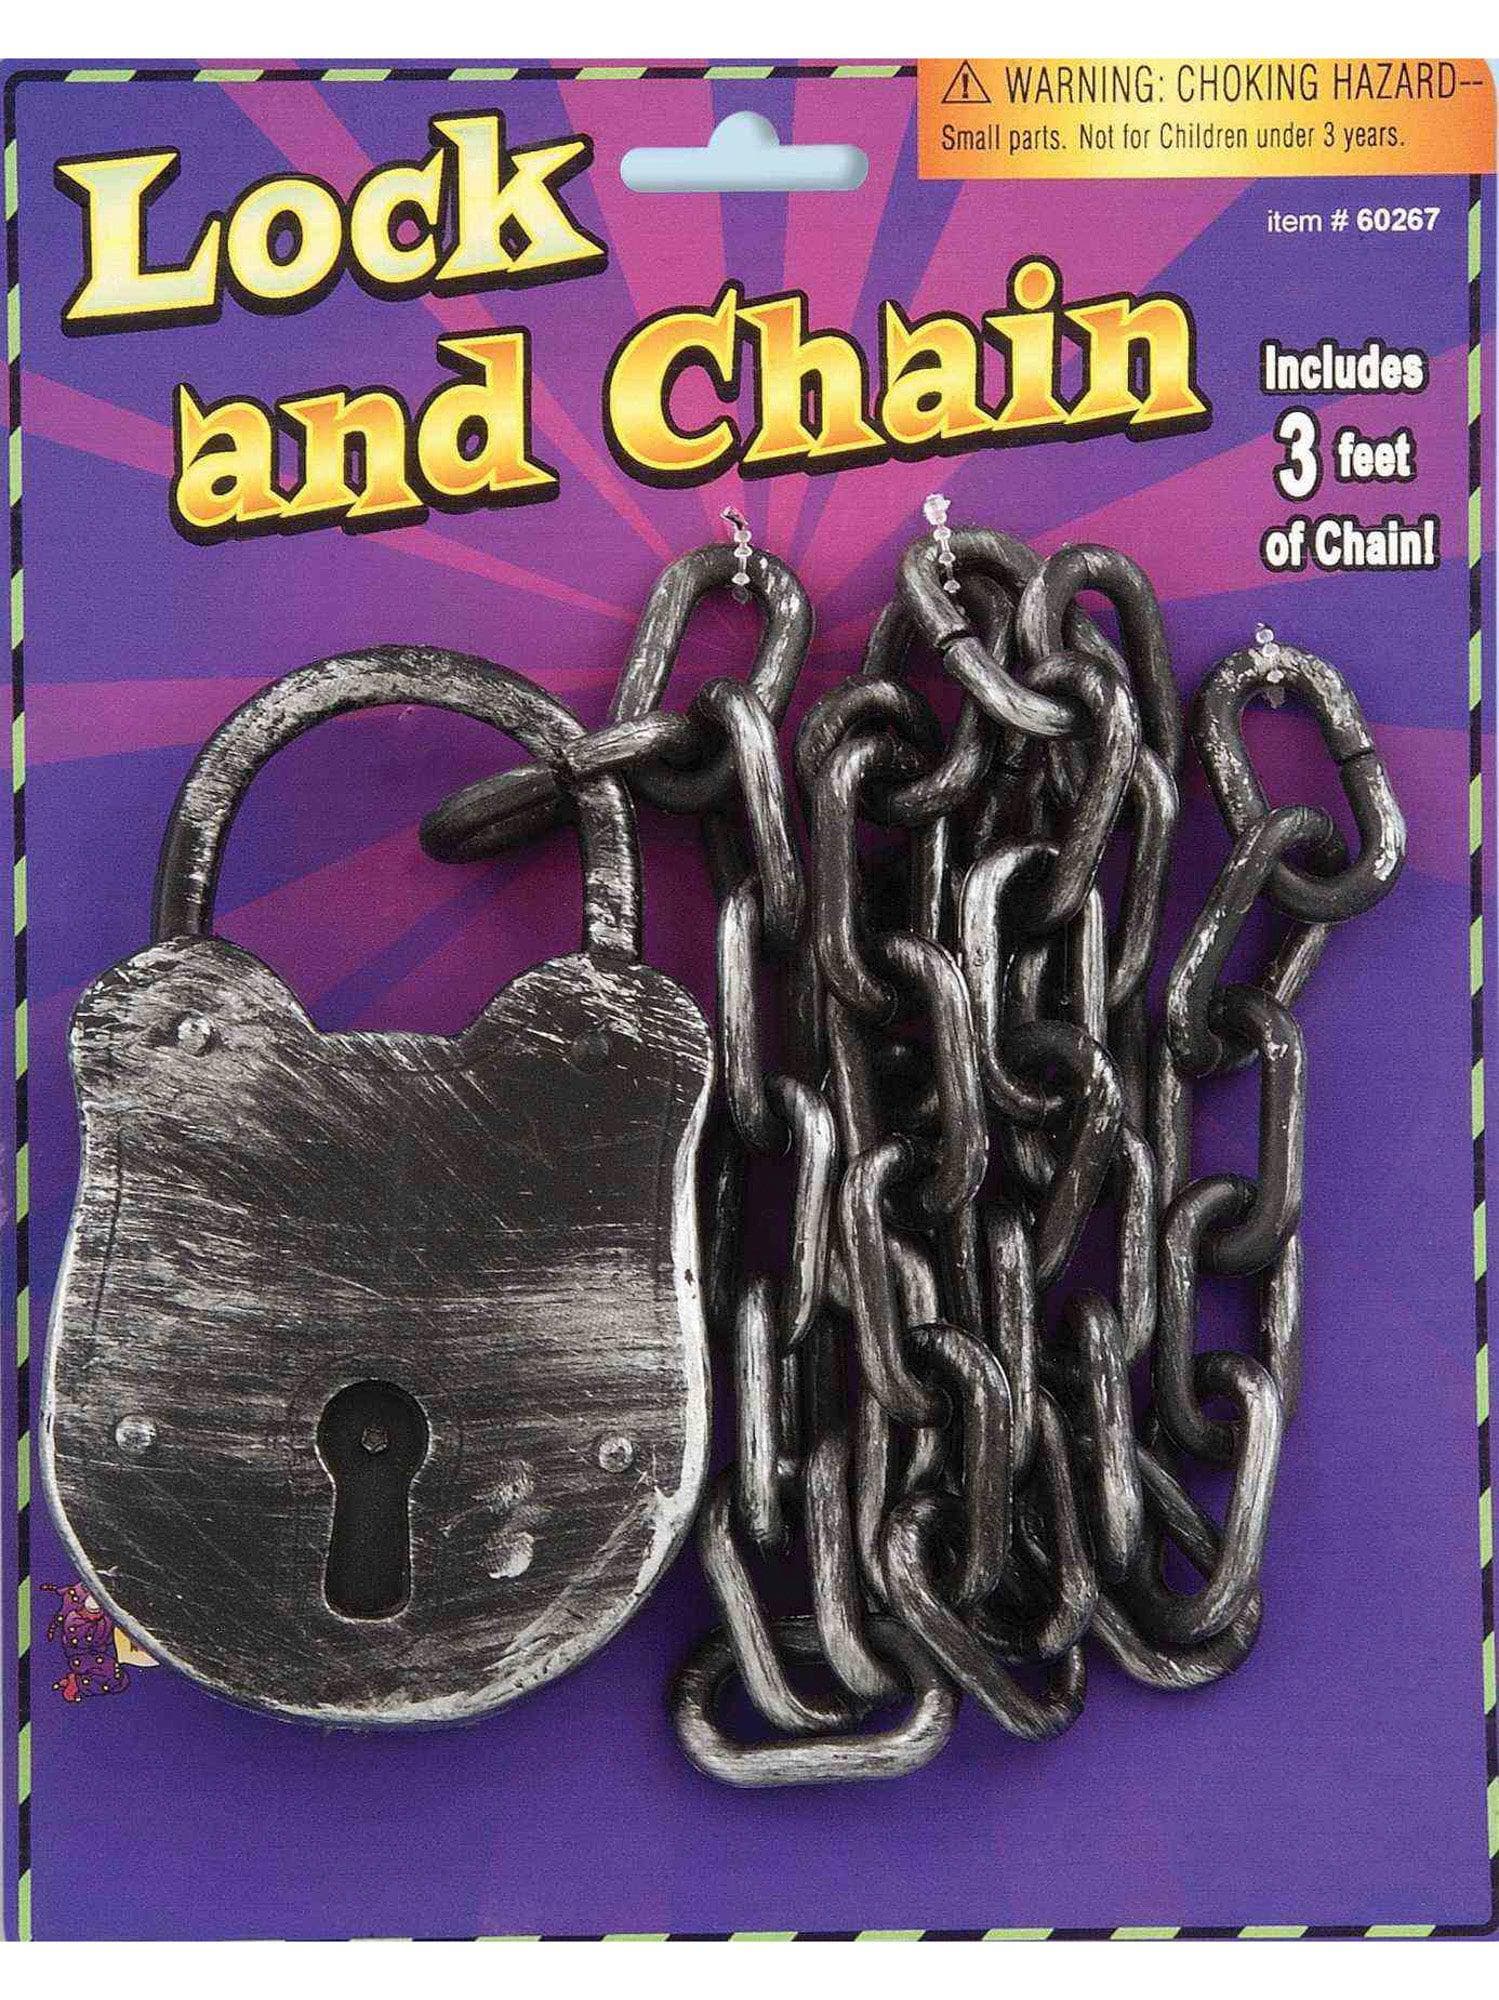 3 Foot Lock and Chain Prop - costumes.com